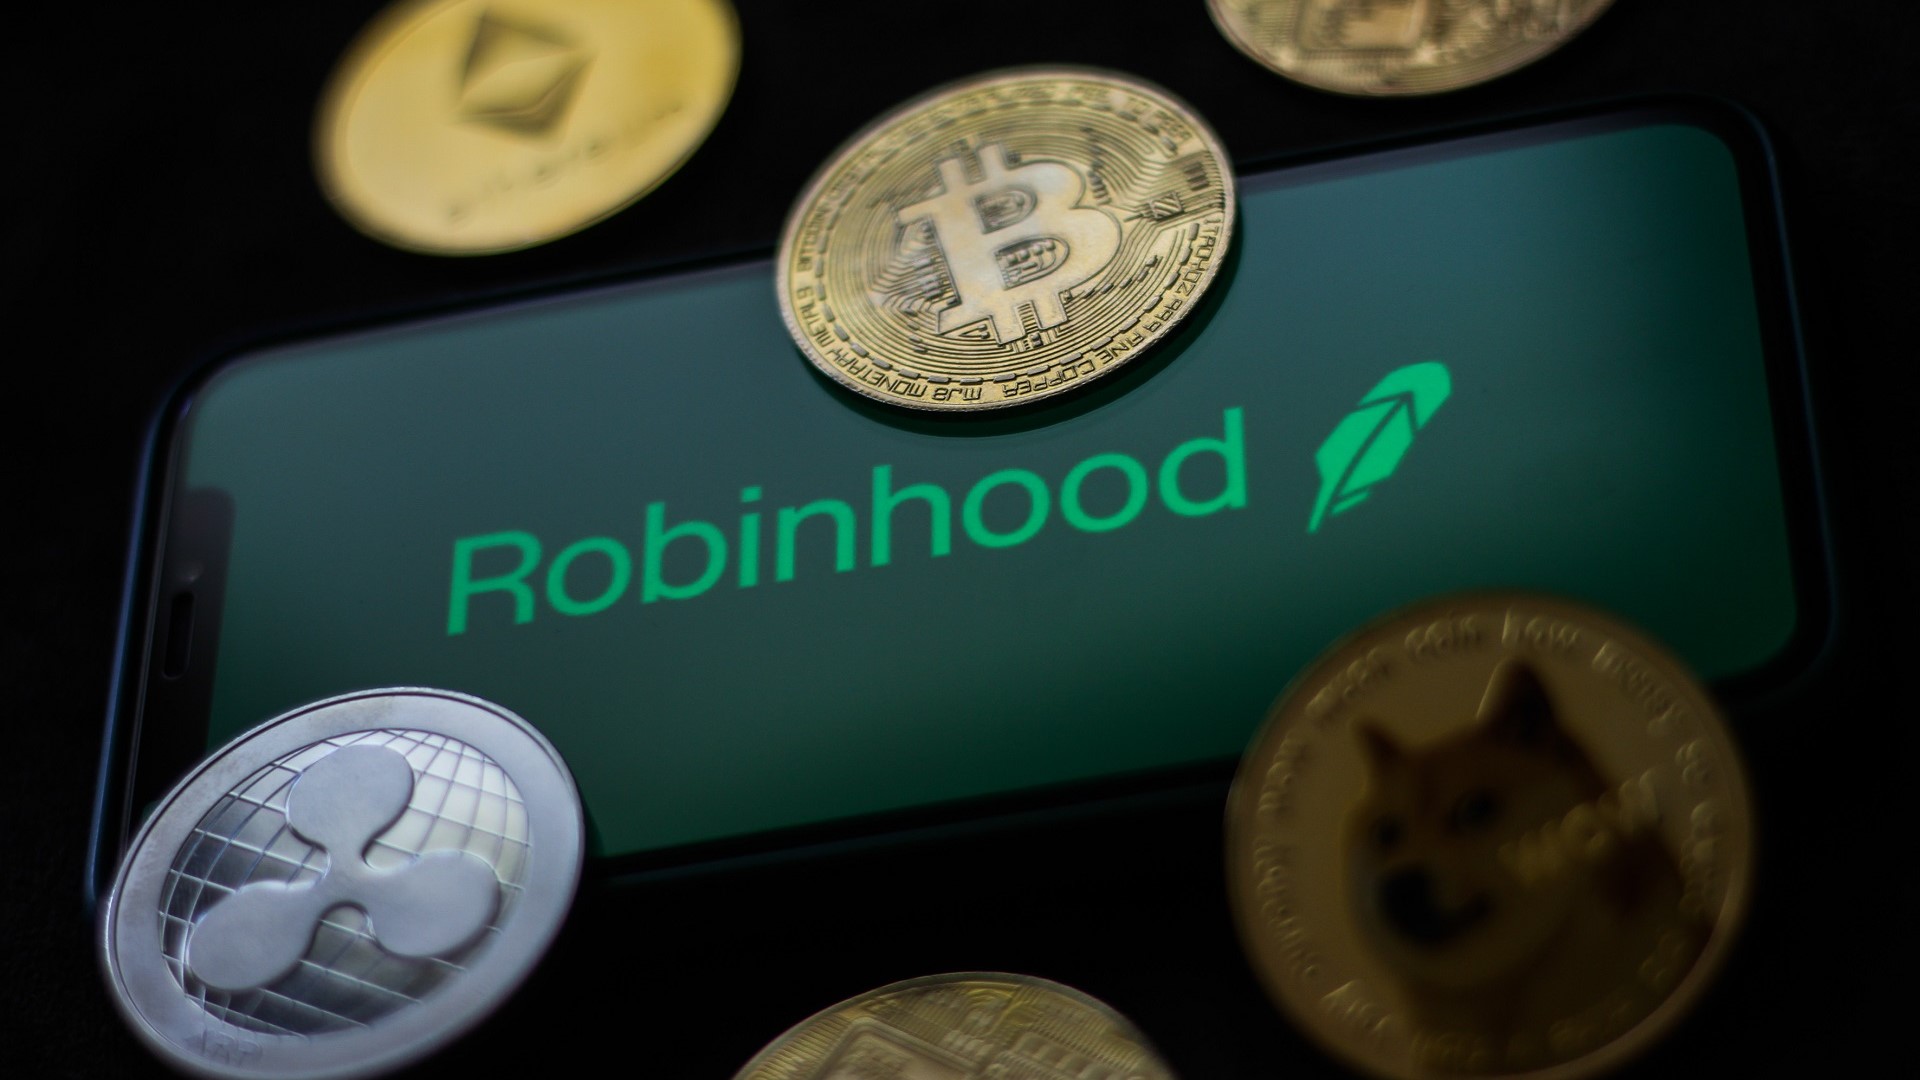 what crypto currency on robinhood